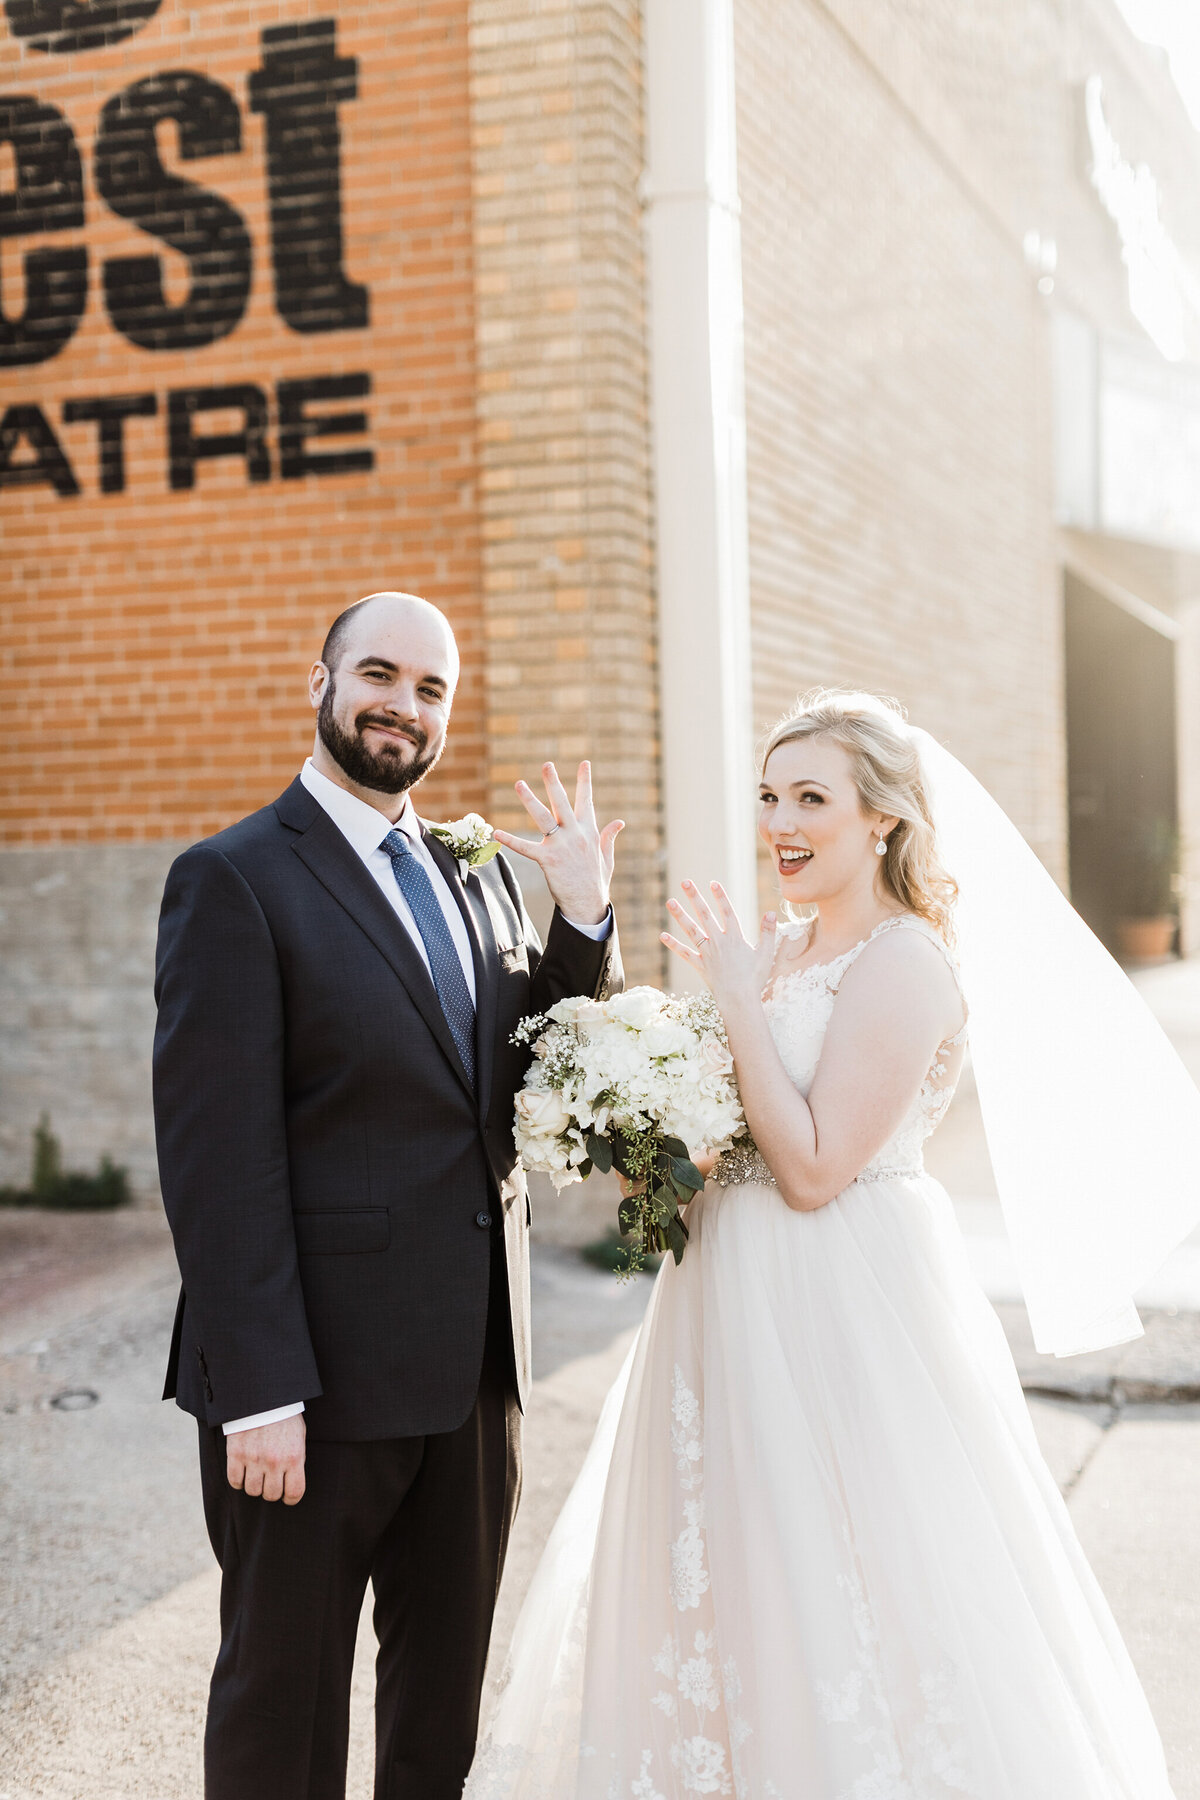 A portrait of a bride and groom playfully showing off their wedding rings after their ceremony in Fort Worth, Texas. The bride is on the right and is wearing a long, flowing white dress and a white veil while holding a bouquet of white flowers. The groom is on the left and is wearing a black suit with a blue tie and boutonniere.